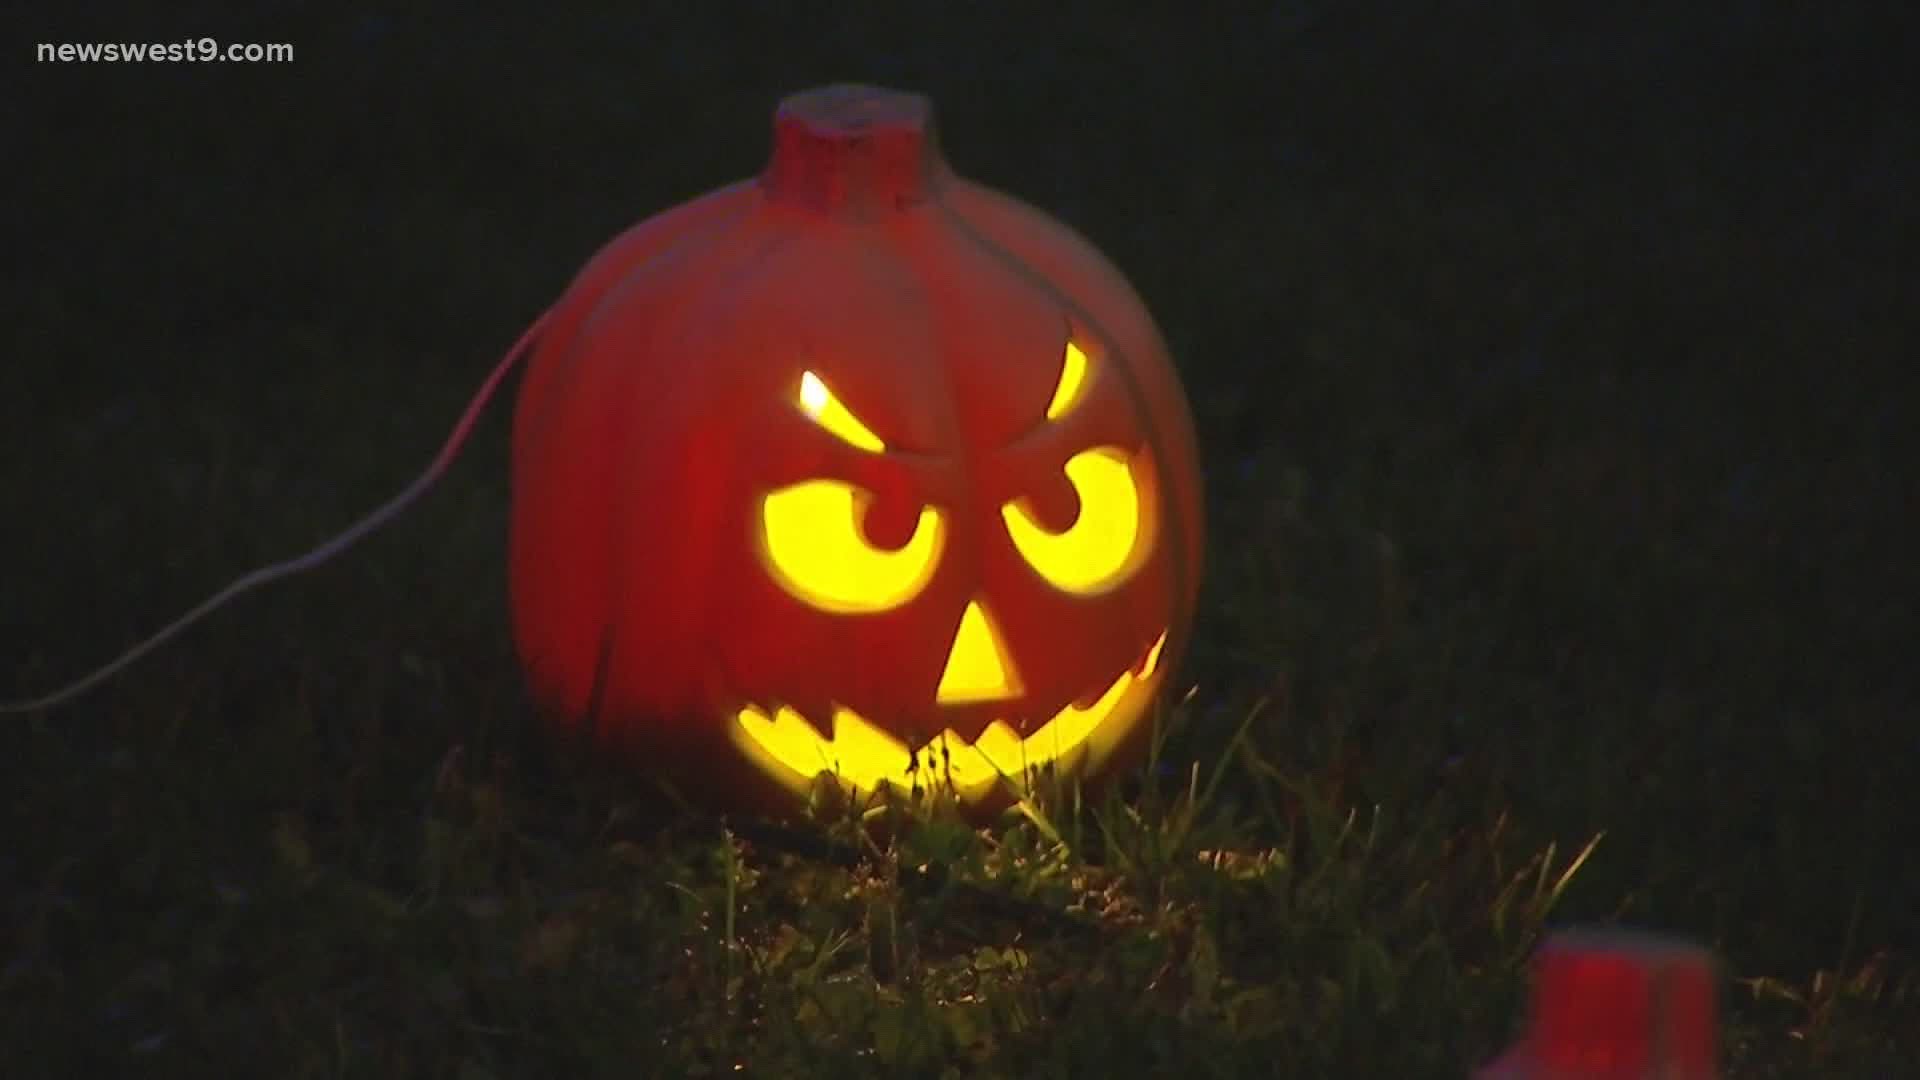 Health and law officials are telling residents to protect themselves and their children by washing their hands while celebrating Halloween.